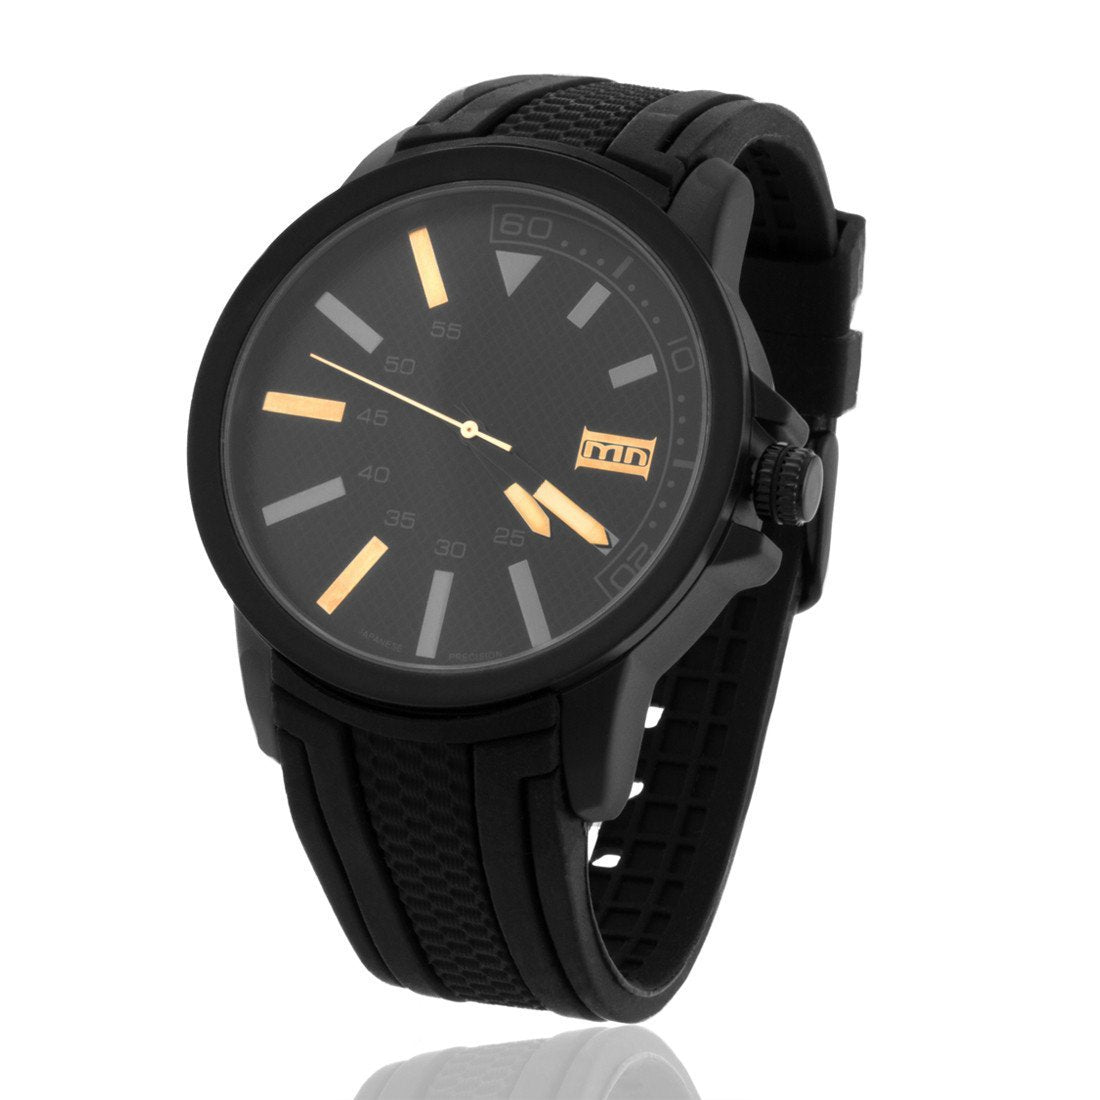 The Blackout Watch Black Gold